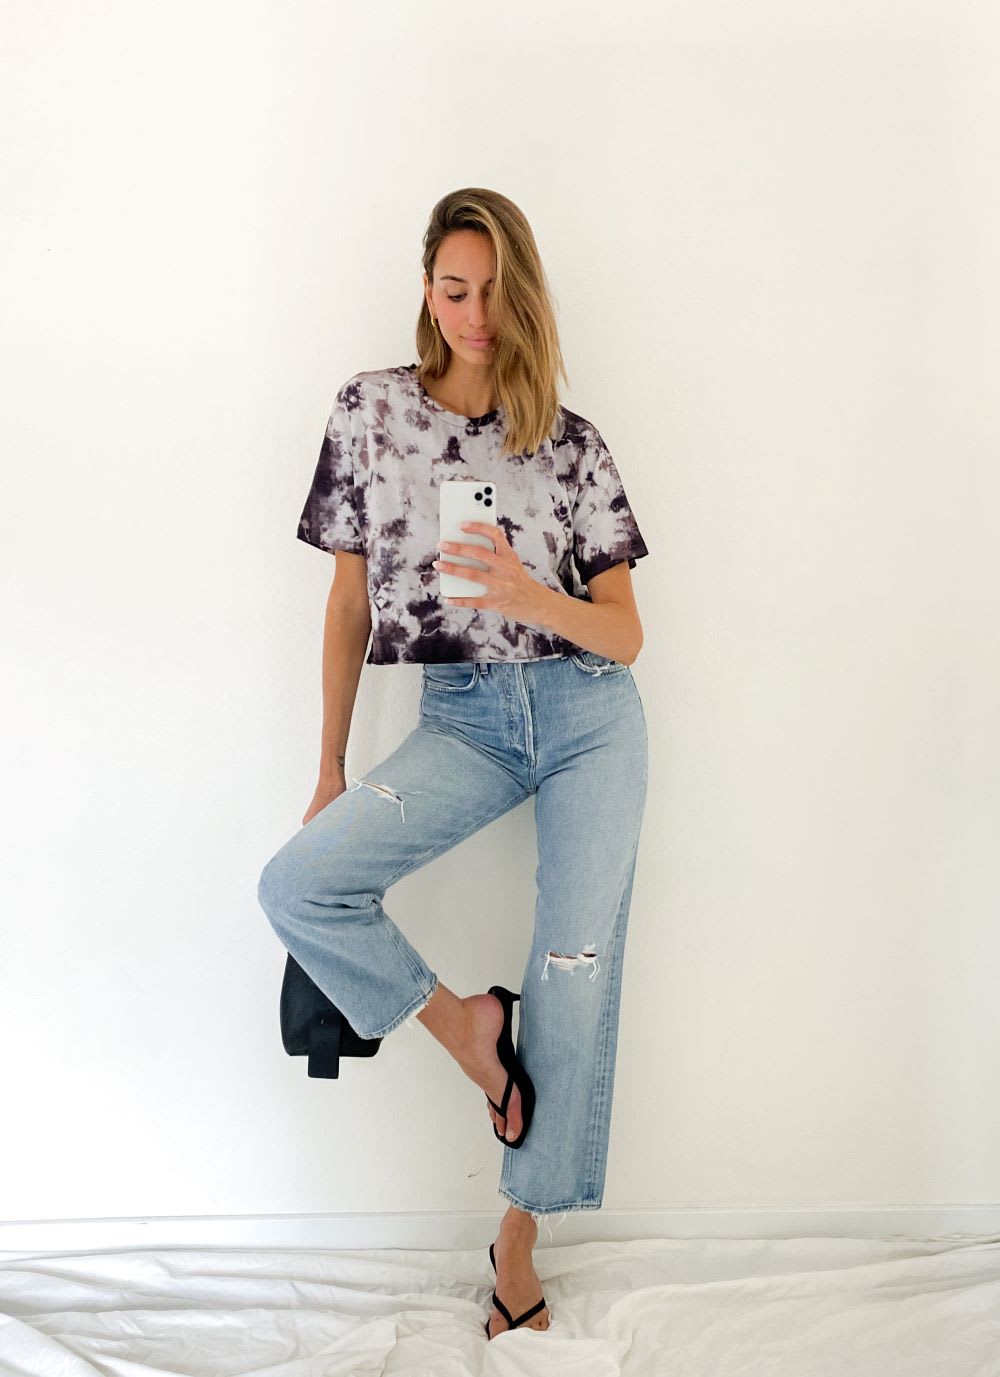 Tie-Dye Outfits: 5 Ways to Wear the Trend - Lulus.com Fashion Blog